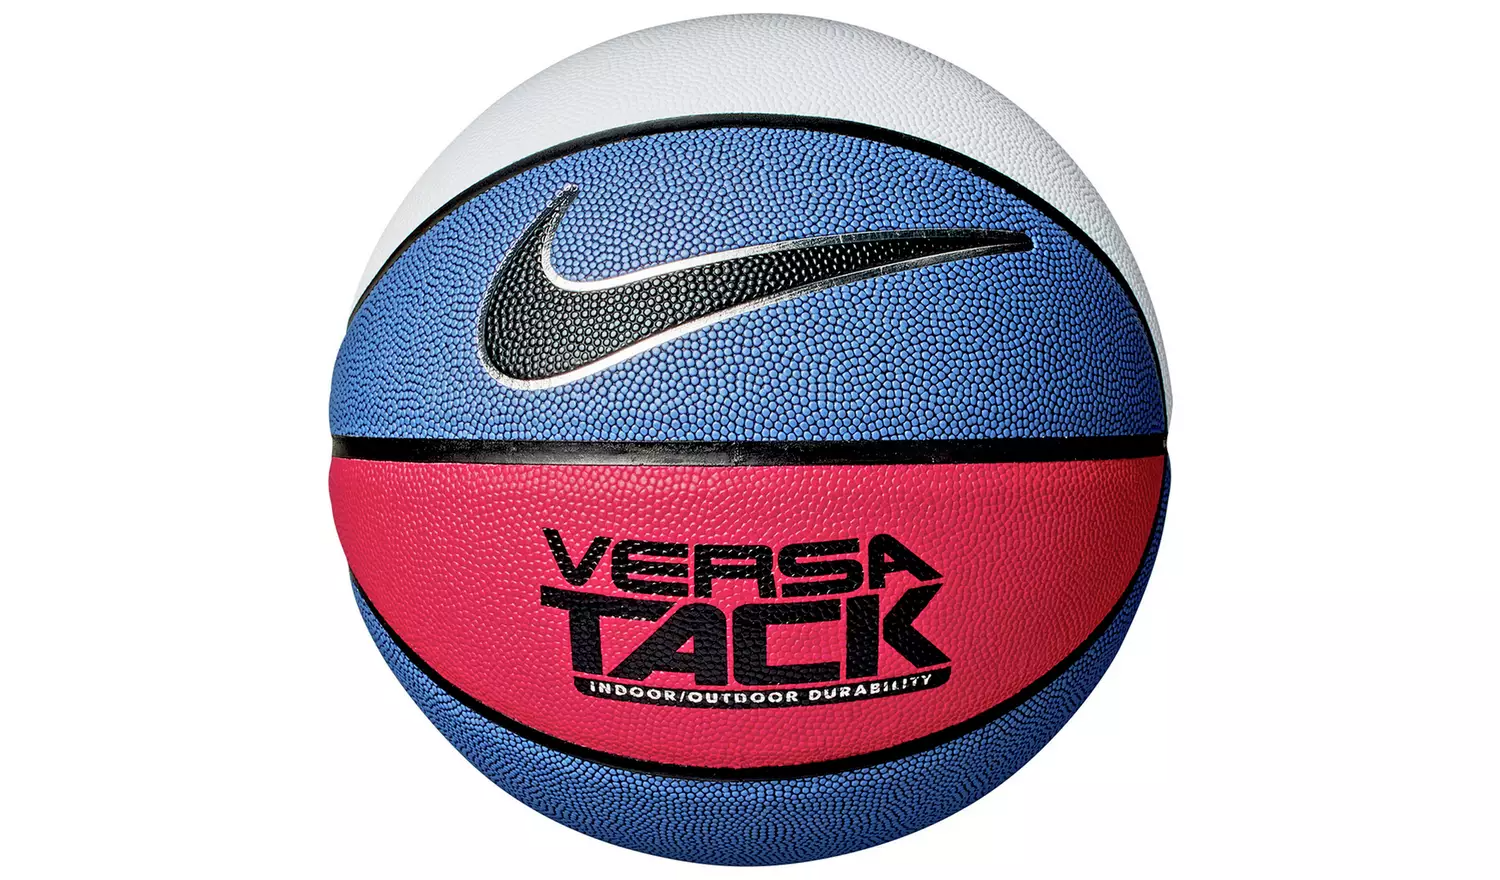 Nike Versa Tack Size 7 Basketball – Blue and Red